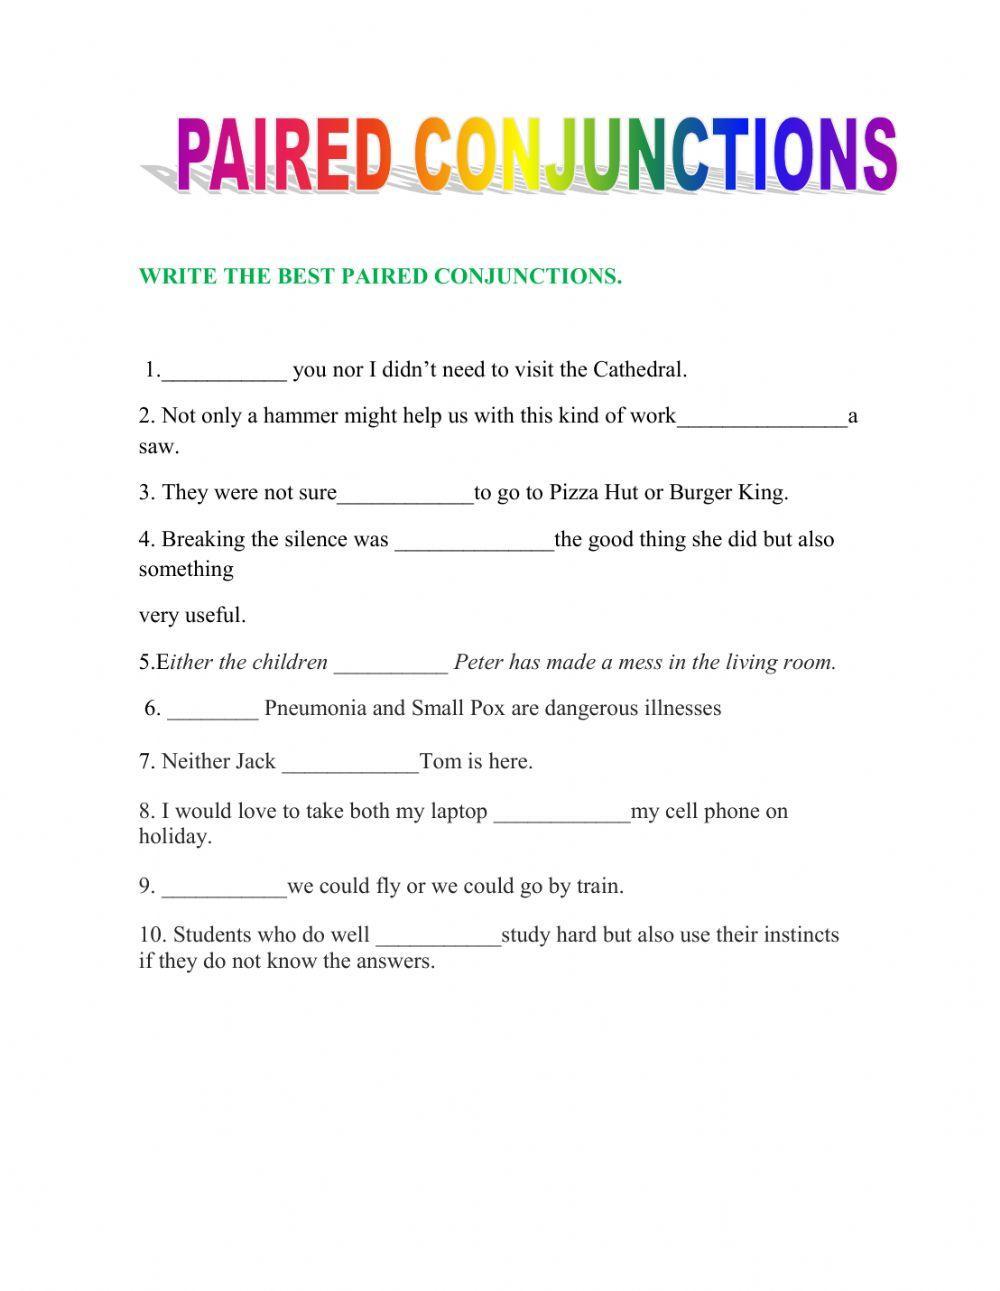 Paired Conjunctions